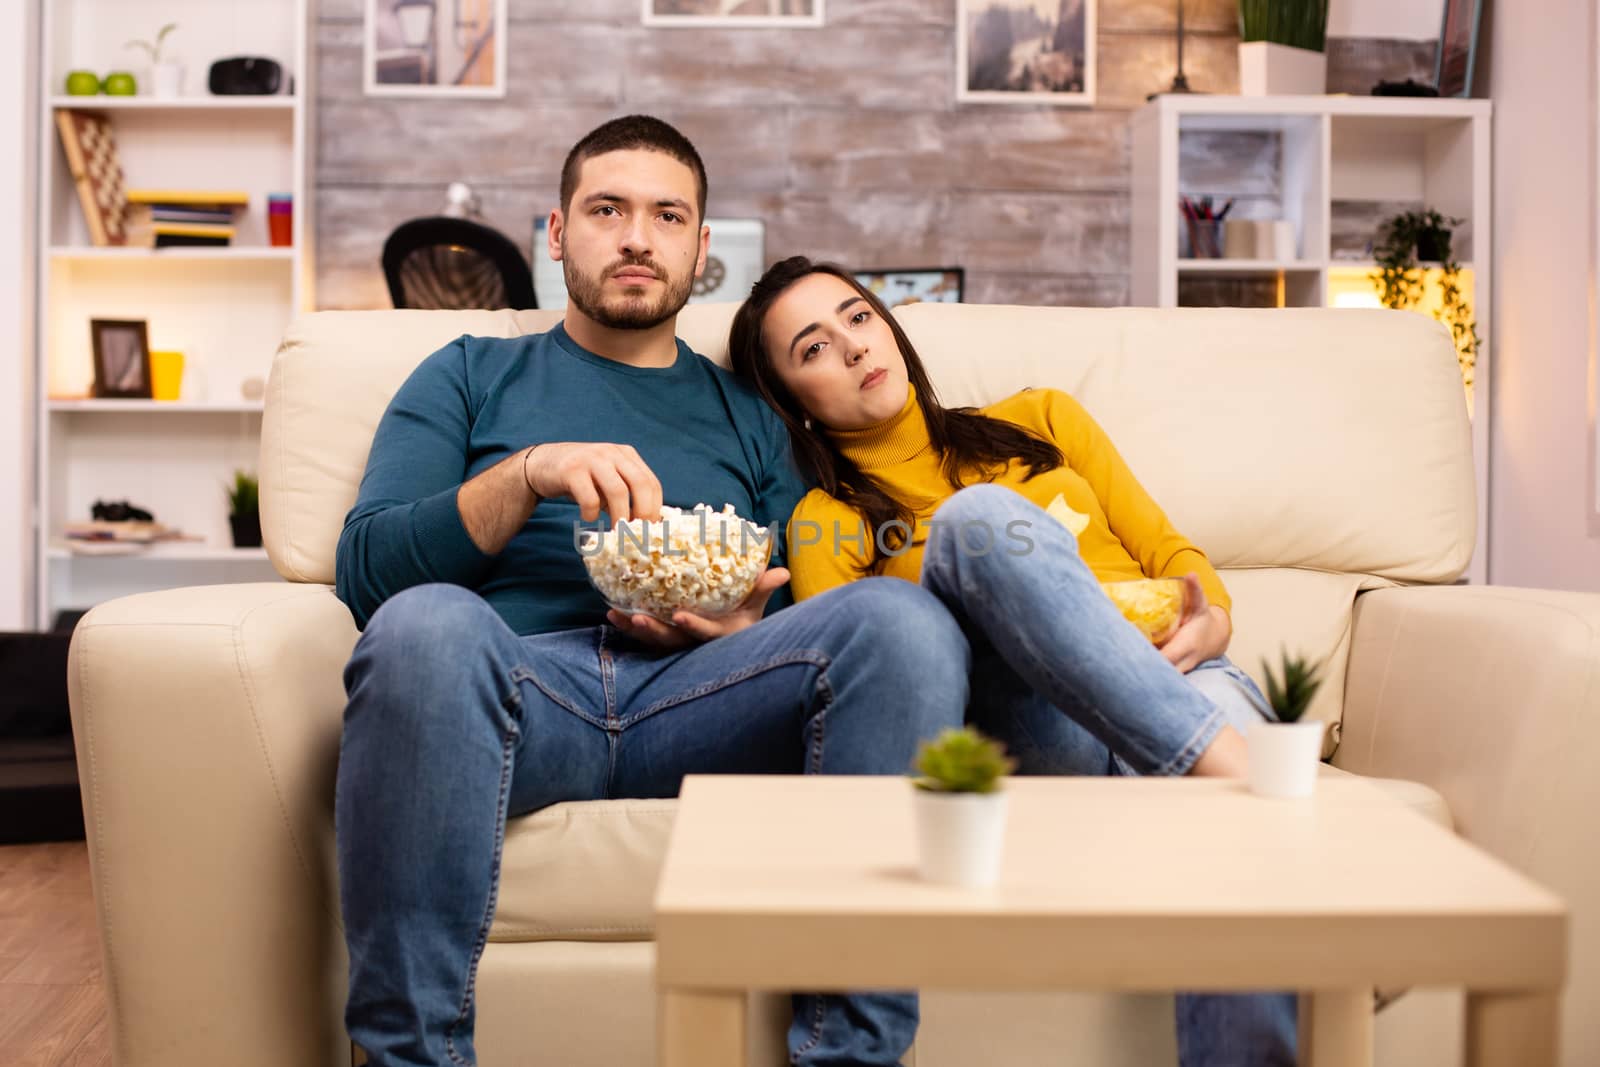 Handsome couple at home eating pop corn and watching TV on the sofa in the living room